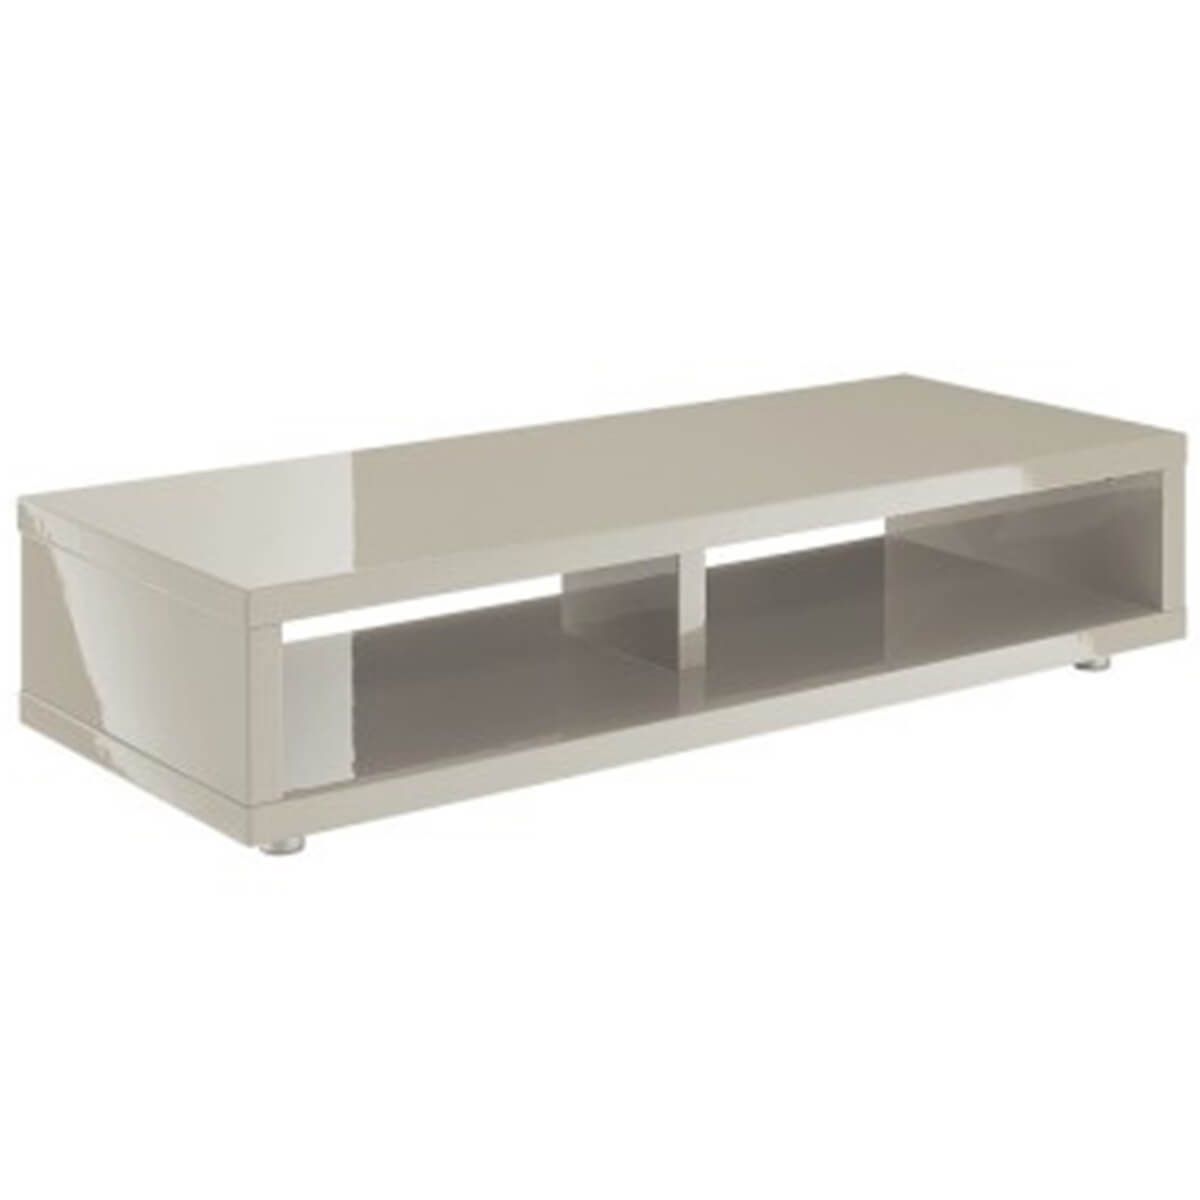 Puro High Gloss Tv Media Unit Stone Or Cream | Fads Within Cream High Gloss Tv Cabinet (View 7 of 15)